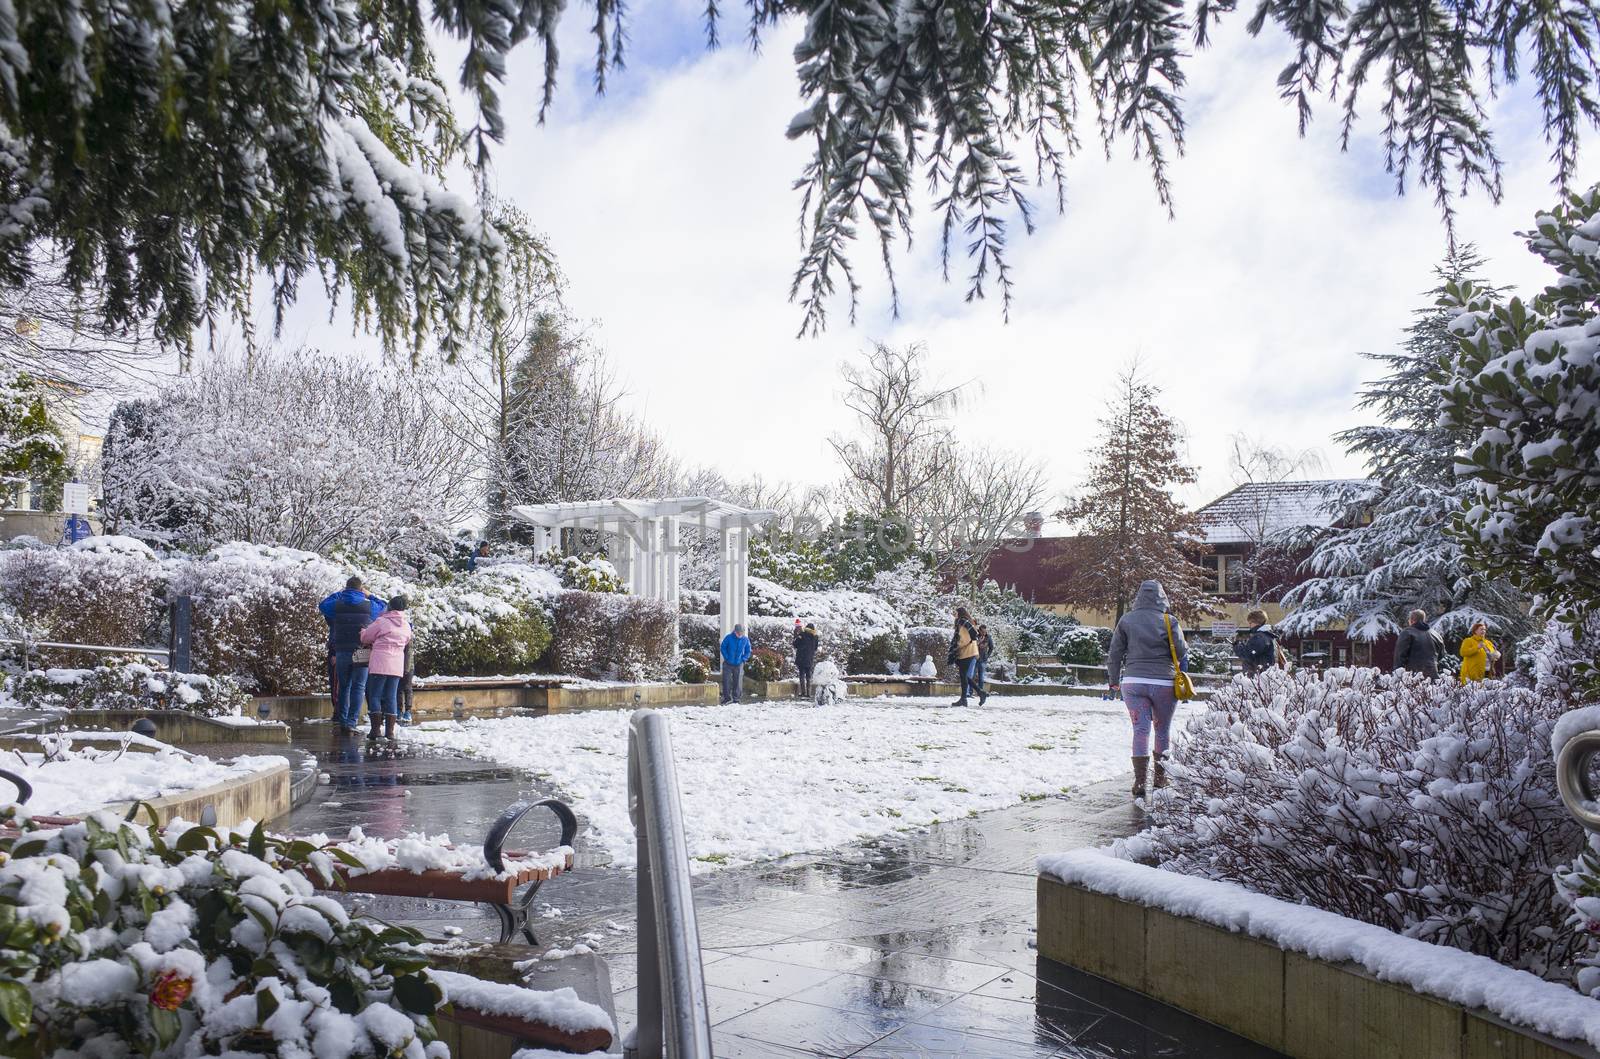 Katoomba, Blue Mountains, Australia, 10 August 2019: Tourists enjoying the snowy gardens at historic Carrington Hotel in Katoomba after a winter snowfall